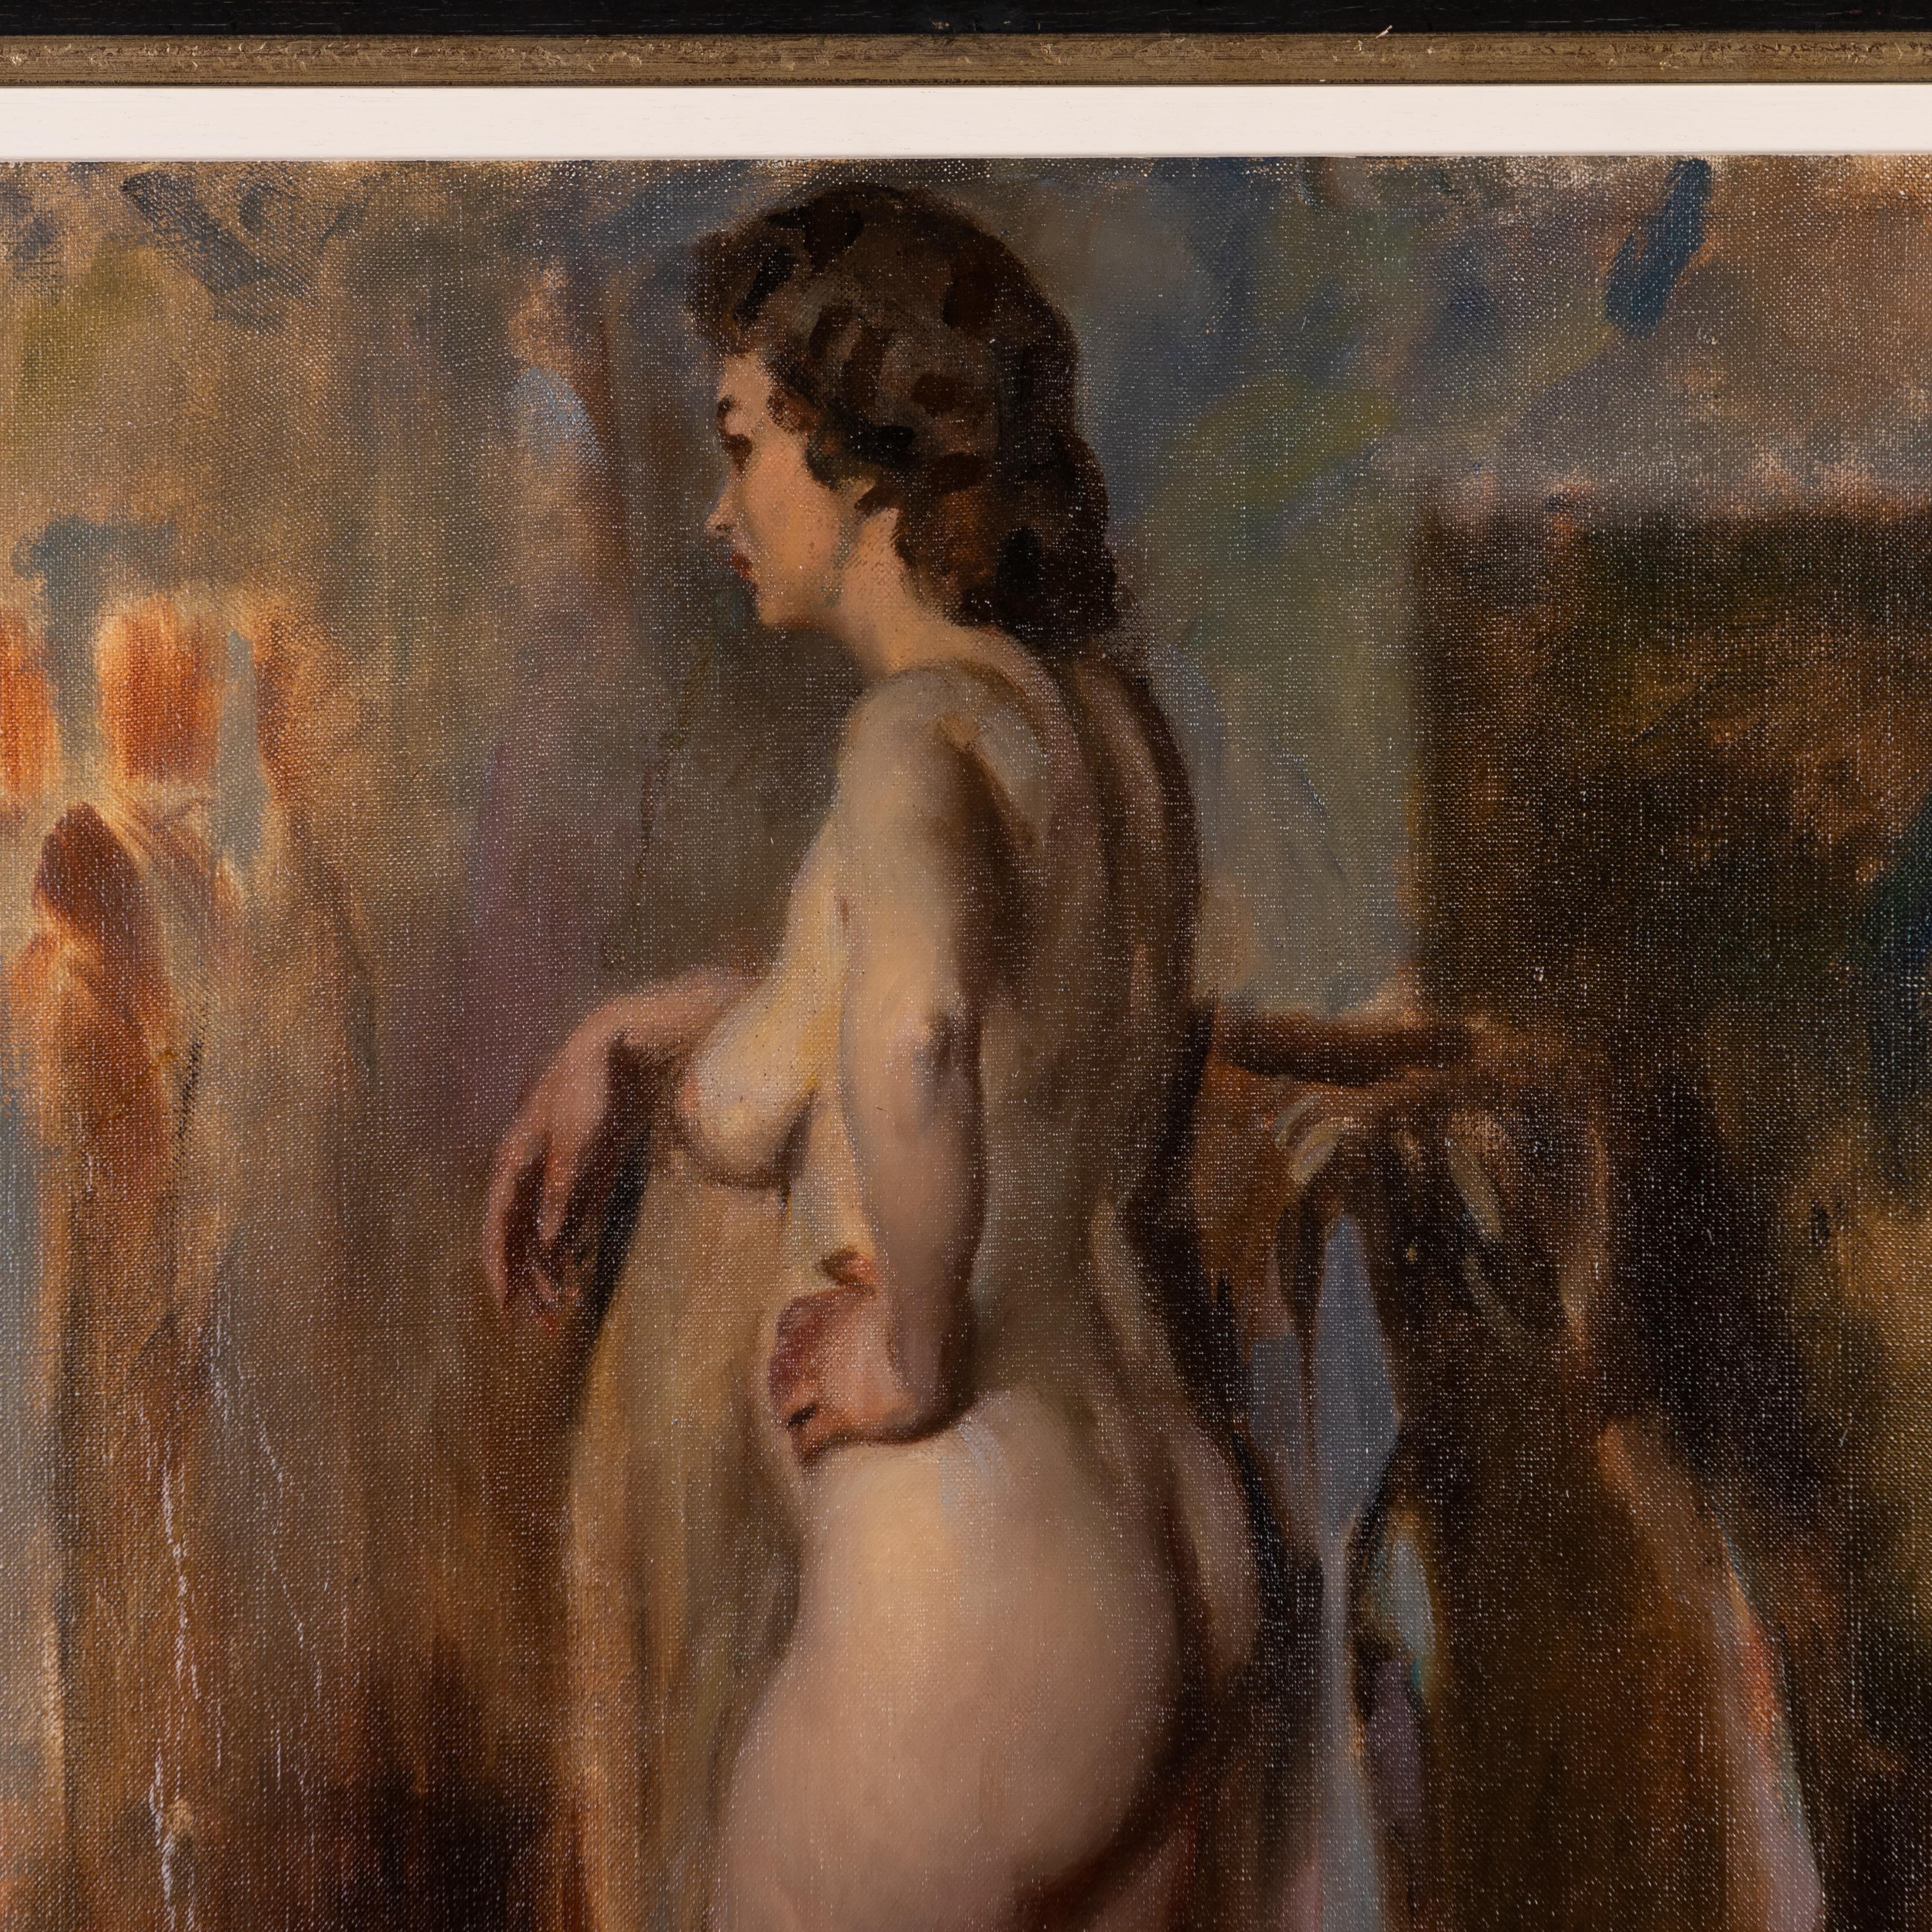 Victor Hume Moody (1896-1990) Nude Portrait Oil Painting on Canvas

About VICTOR HUME MOODY (1896-1990)
Born in London, he studied at Battersea Polytechnic and at Royal College of Art under William Rothenstein. In the early 1930s he moved to Stroud